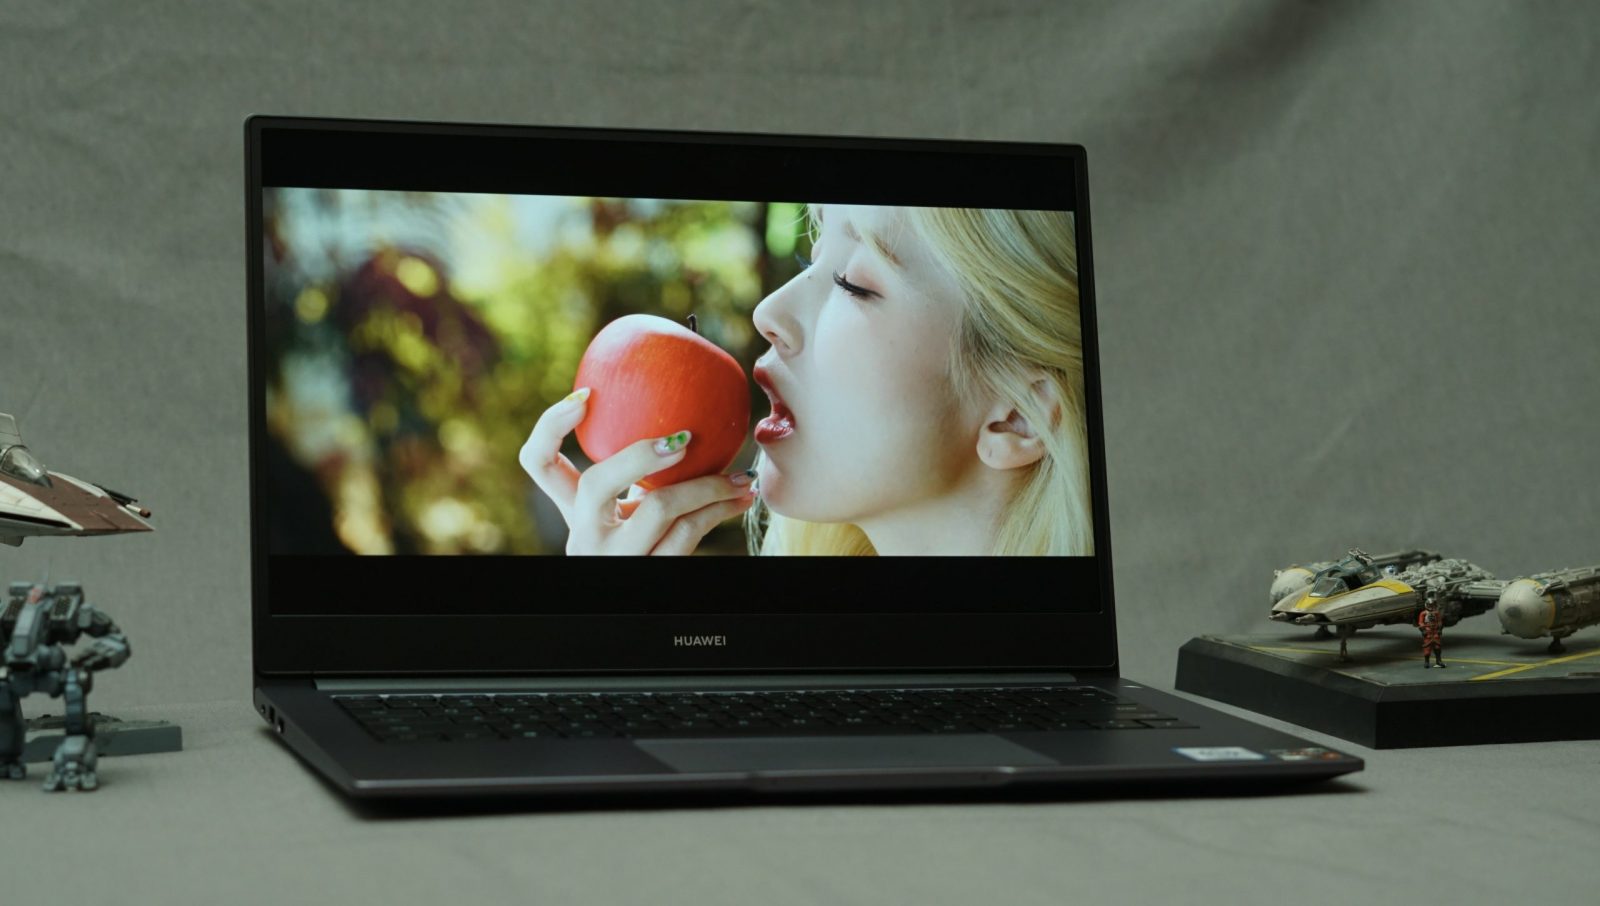 Kpop music video being played on the Huawei Matebook D14